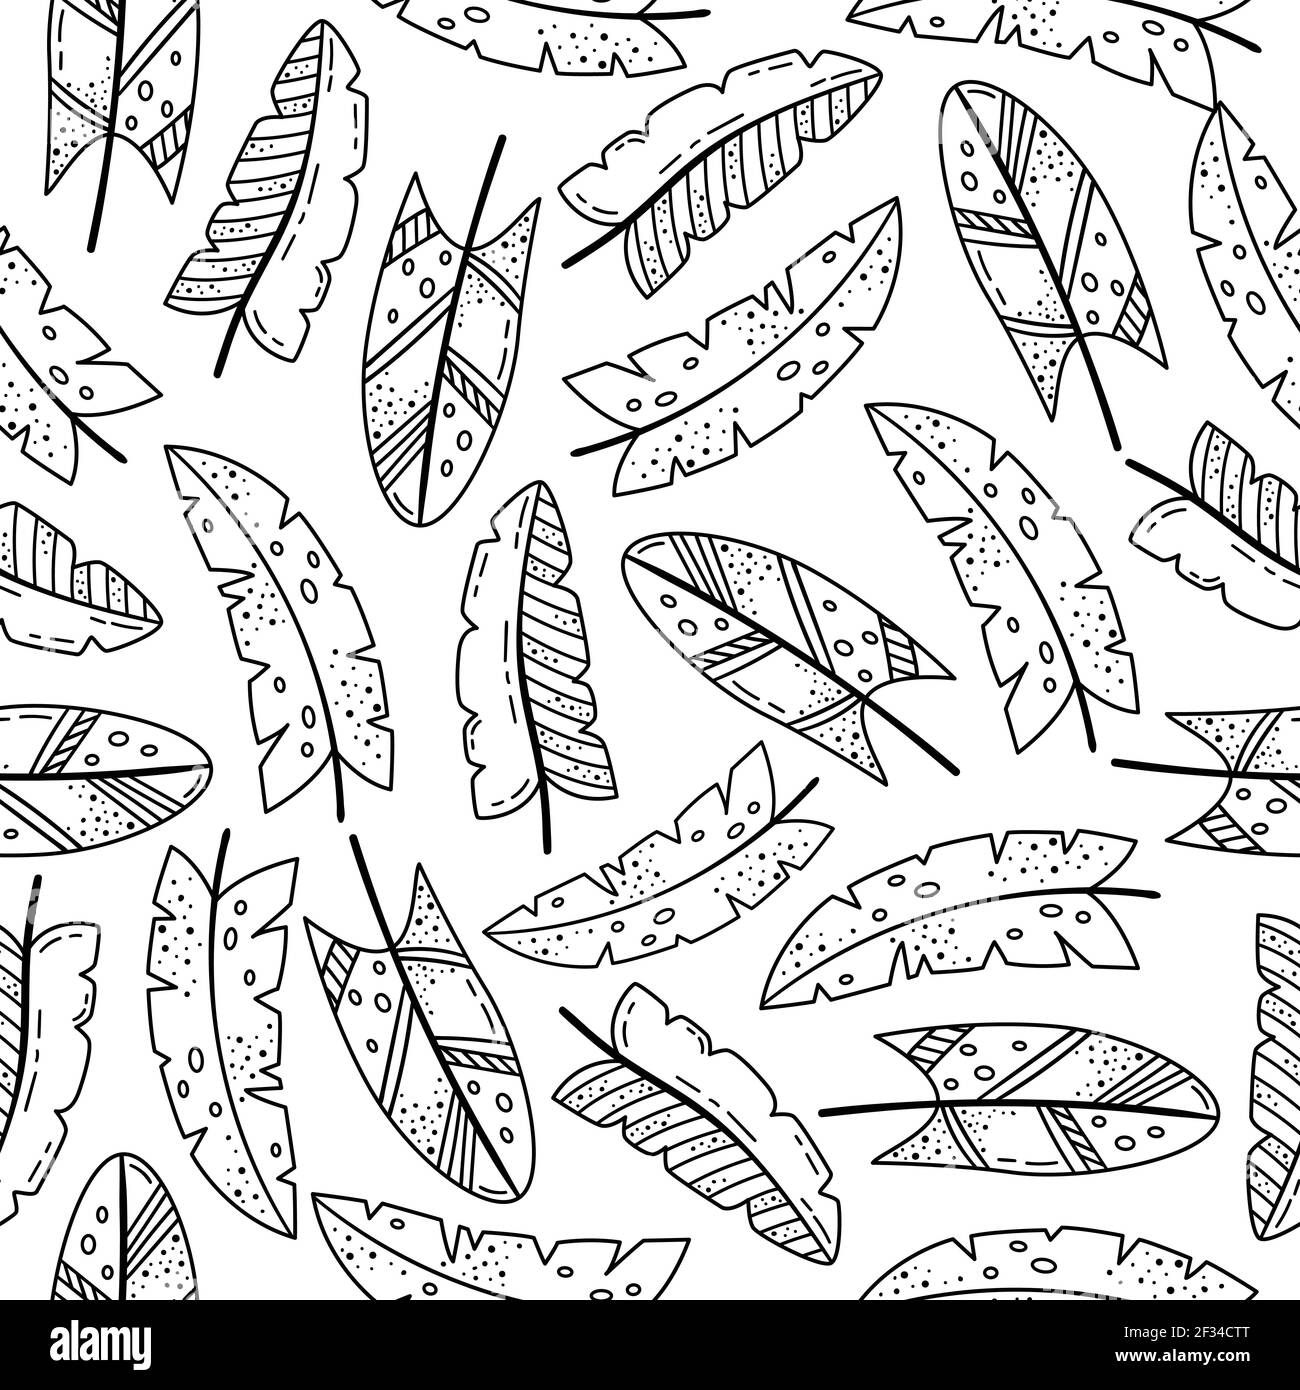 Hand drawn vector seamless pattern with doodles illustrations. Creative feathers. Decorative background. Stock Vector